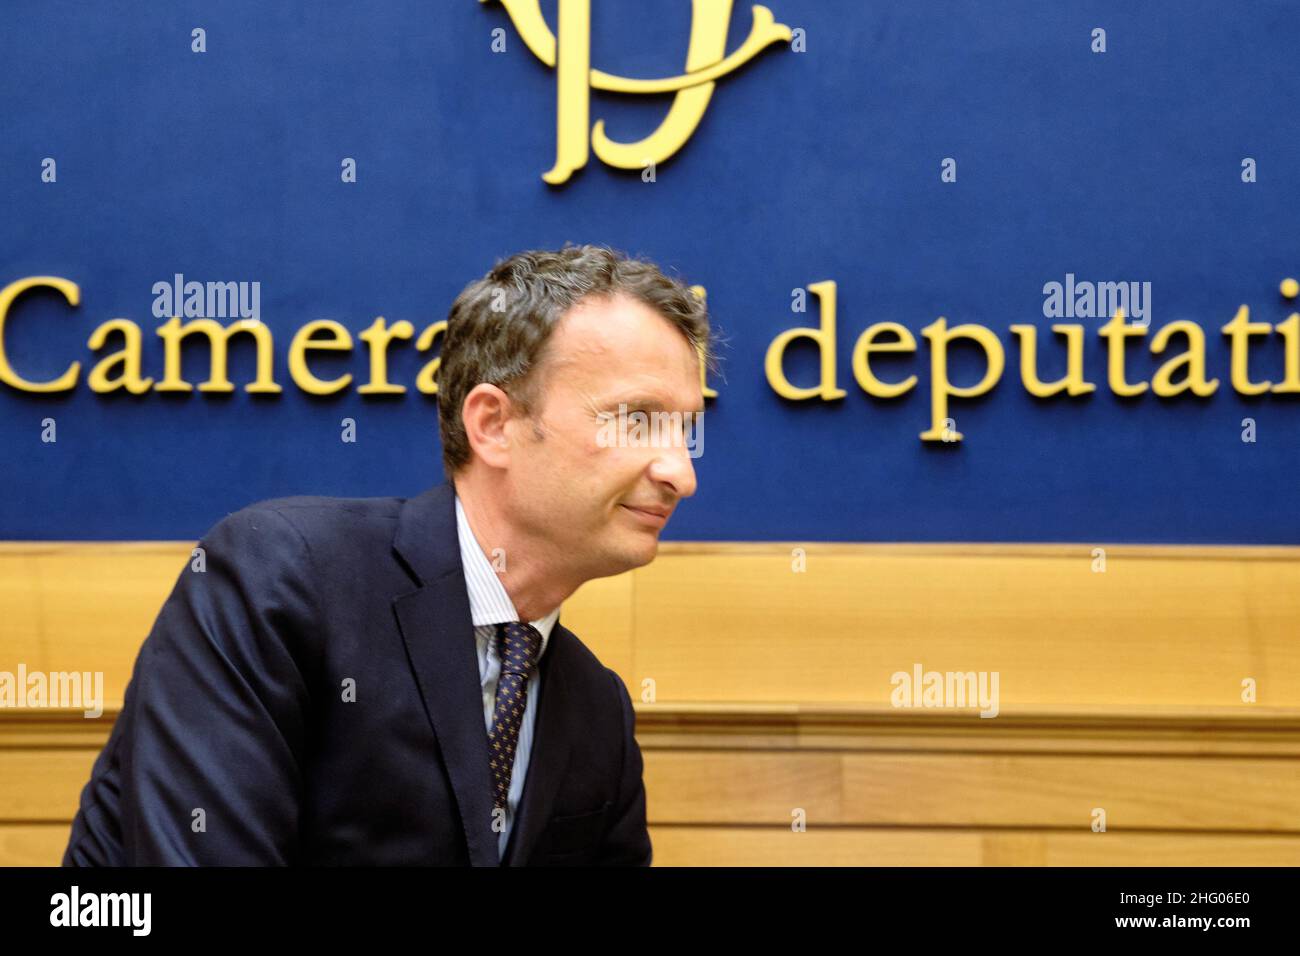 Mauro Scrobogna /LaPresse June 30, 2021 Rome, Italy Politics Chamber of Deputies - press conference on Just criminal trial and reasonable timeframe In the photo: Criminal lawyer Guido Camera Stock Photo